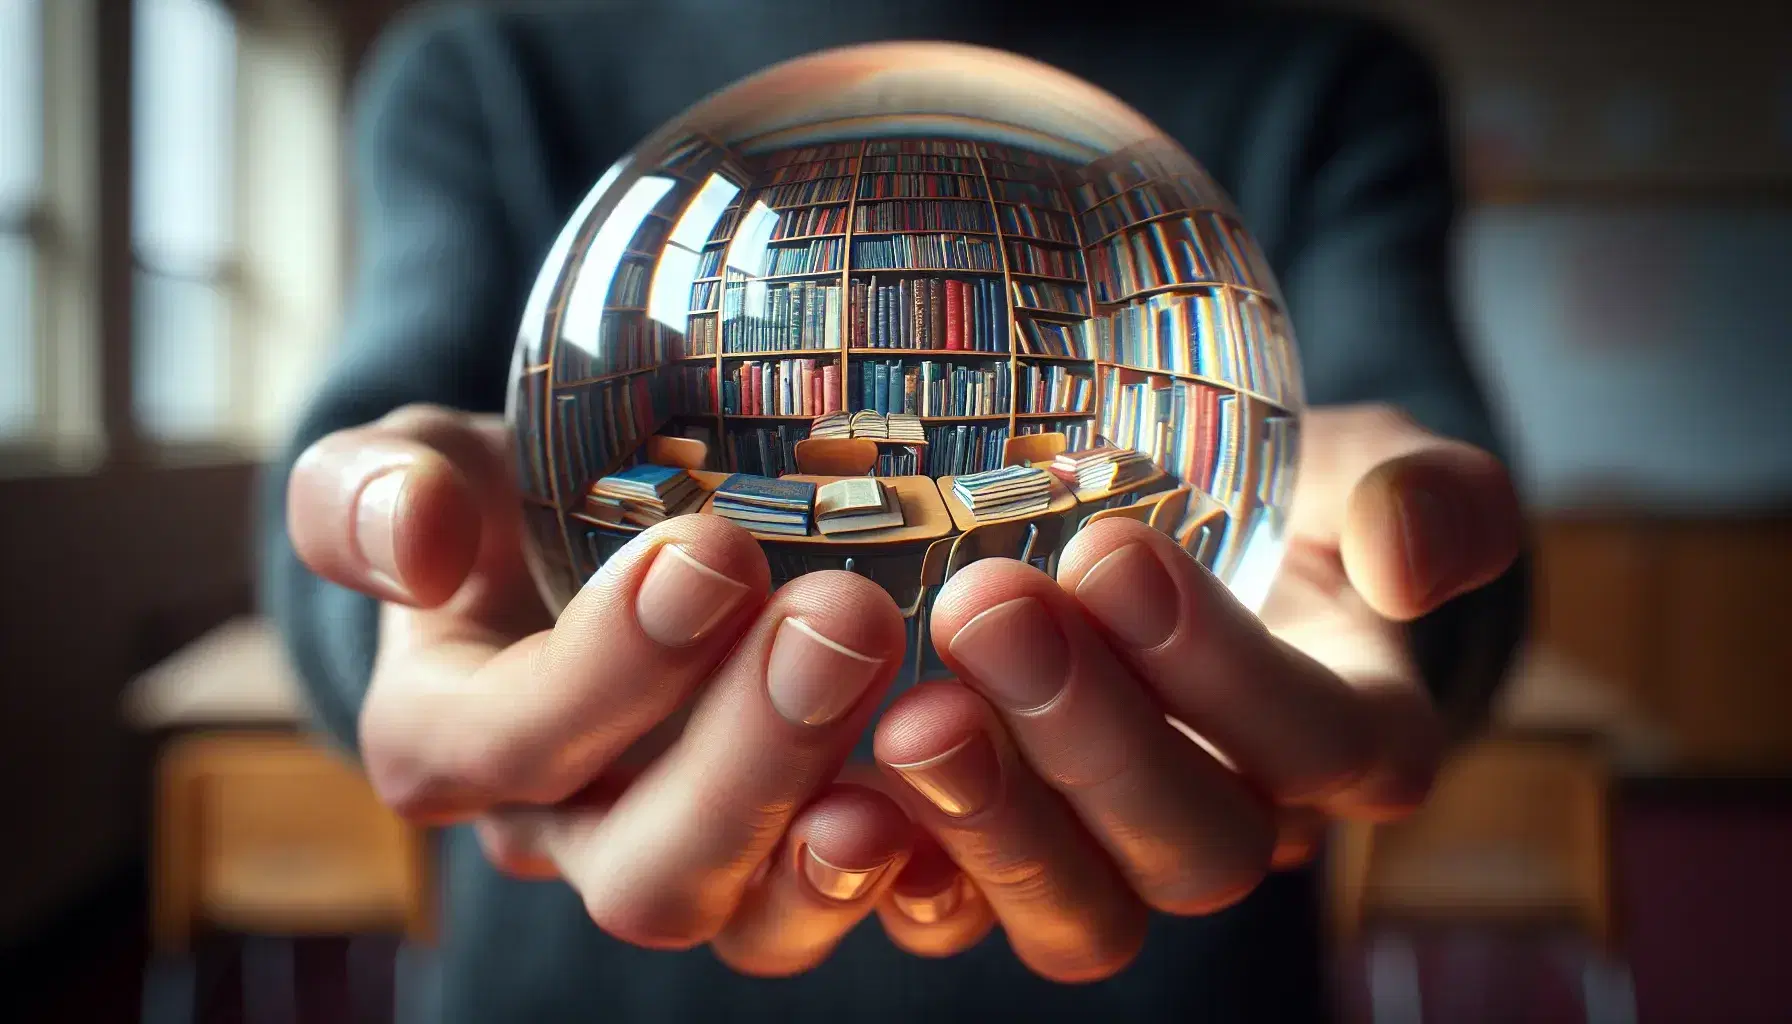 Adult hands holding a clear glass sphere with a distorted view of a colorful bookshelf in the background, light creating prismatic effects on skin.